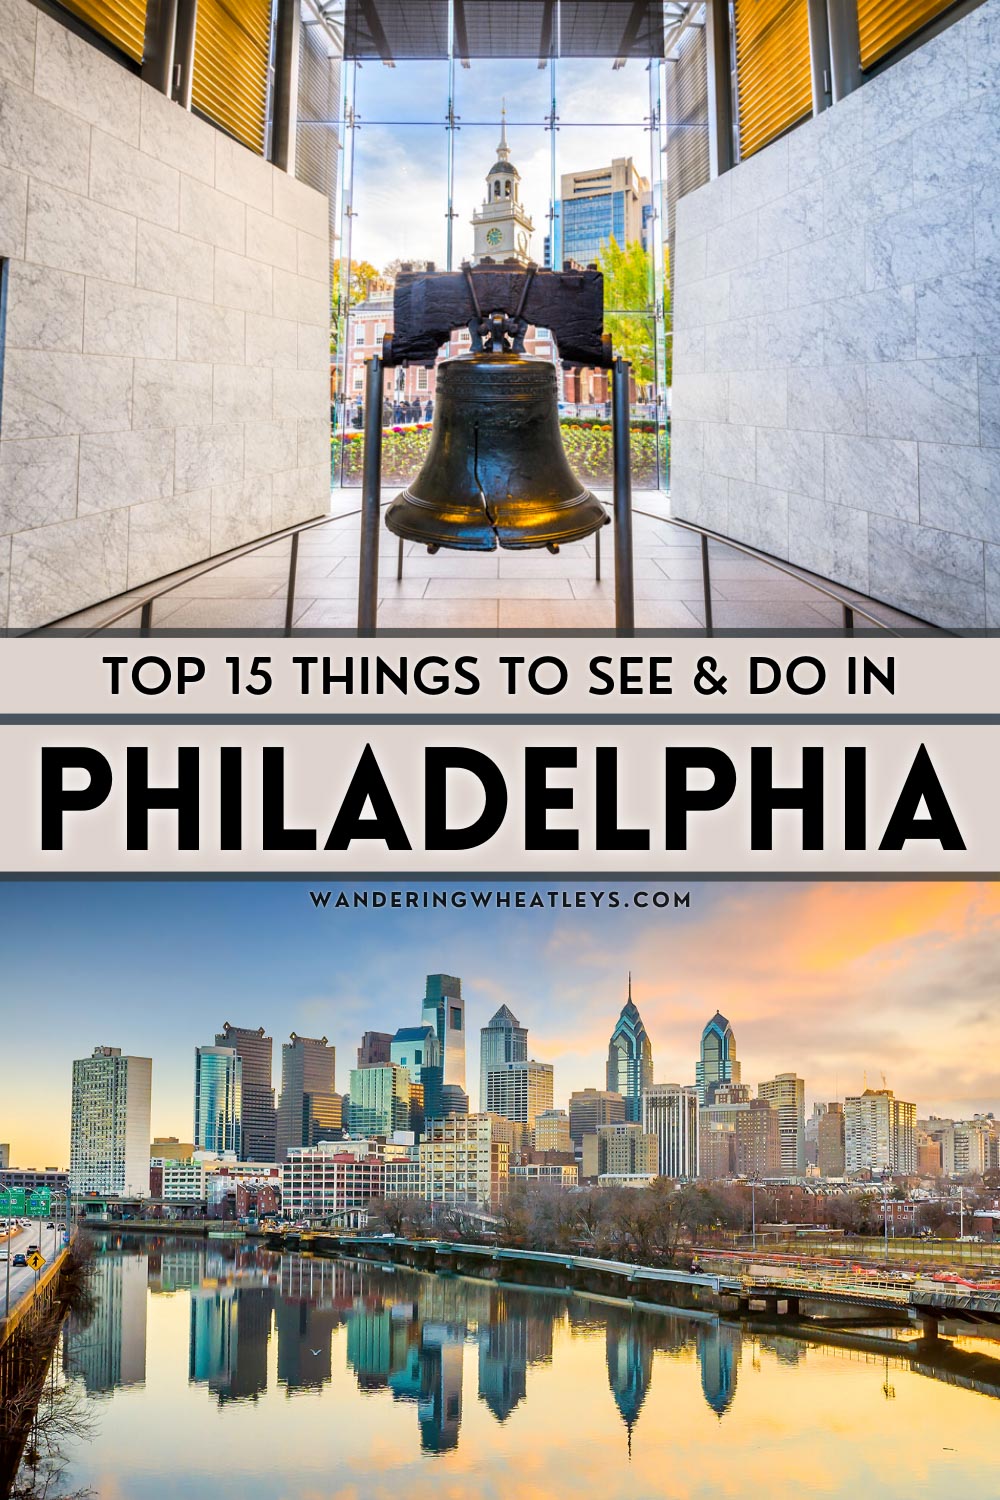 The Best Things to do in Philadelphia